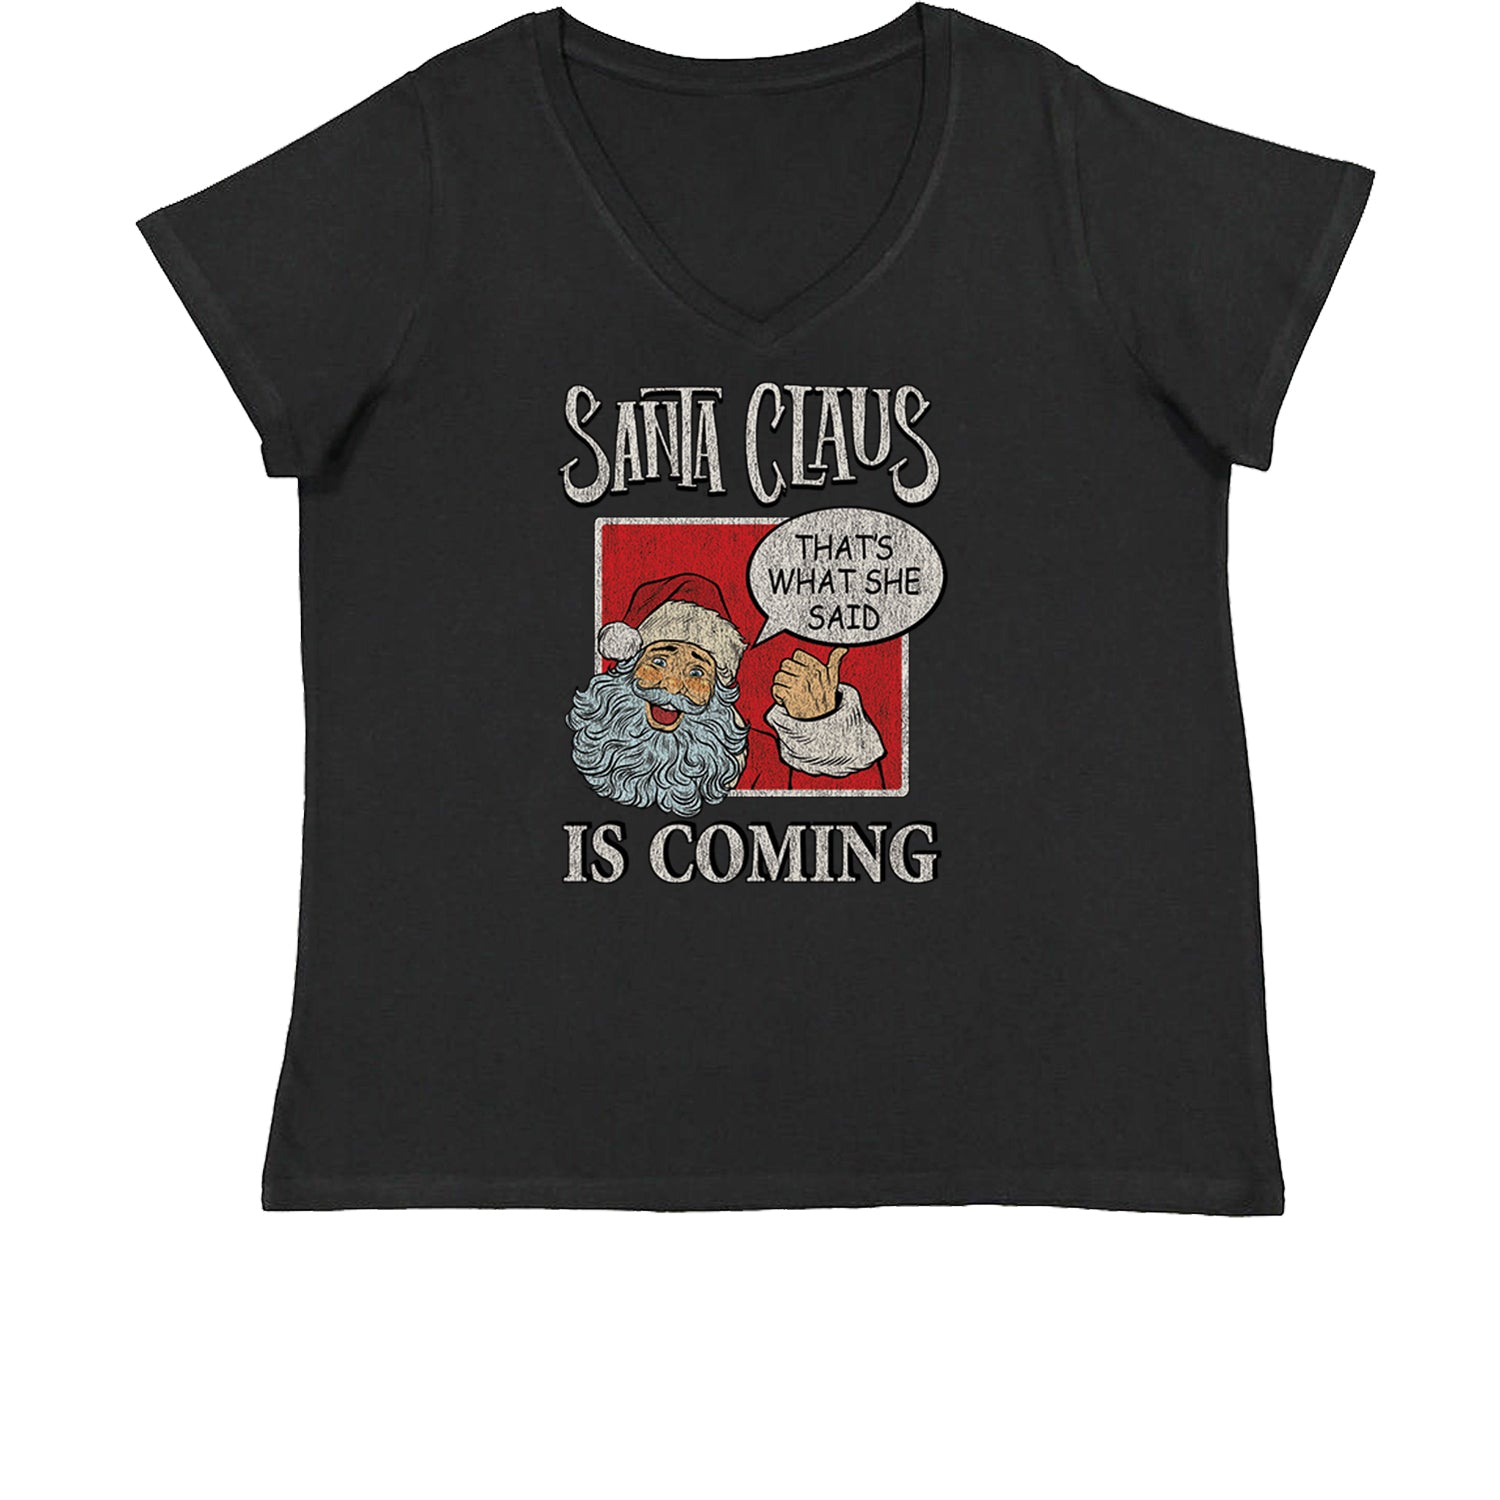 Santa Claus Is Coming - That's What She Said Womens Plus Size V-Neck T-shirt christmas, dunder, holiday, michael, mifflin, office, sweater, ugly, xmas by Expression Tees